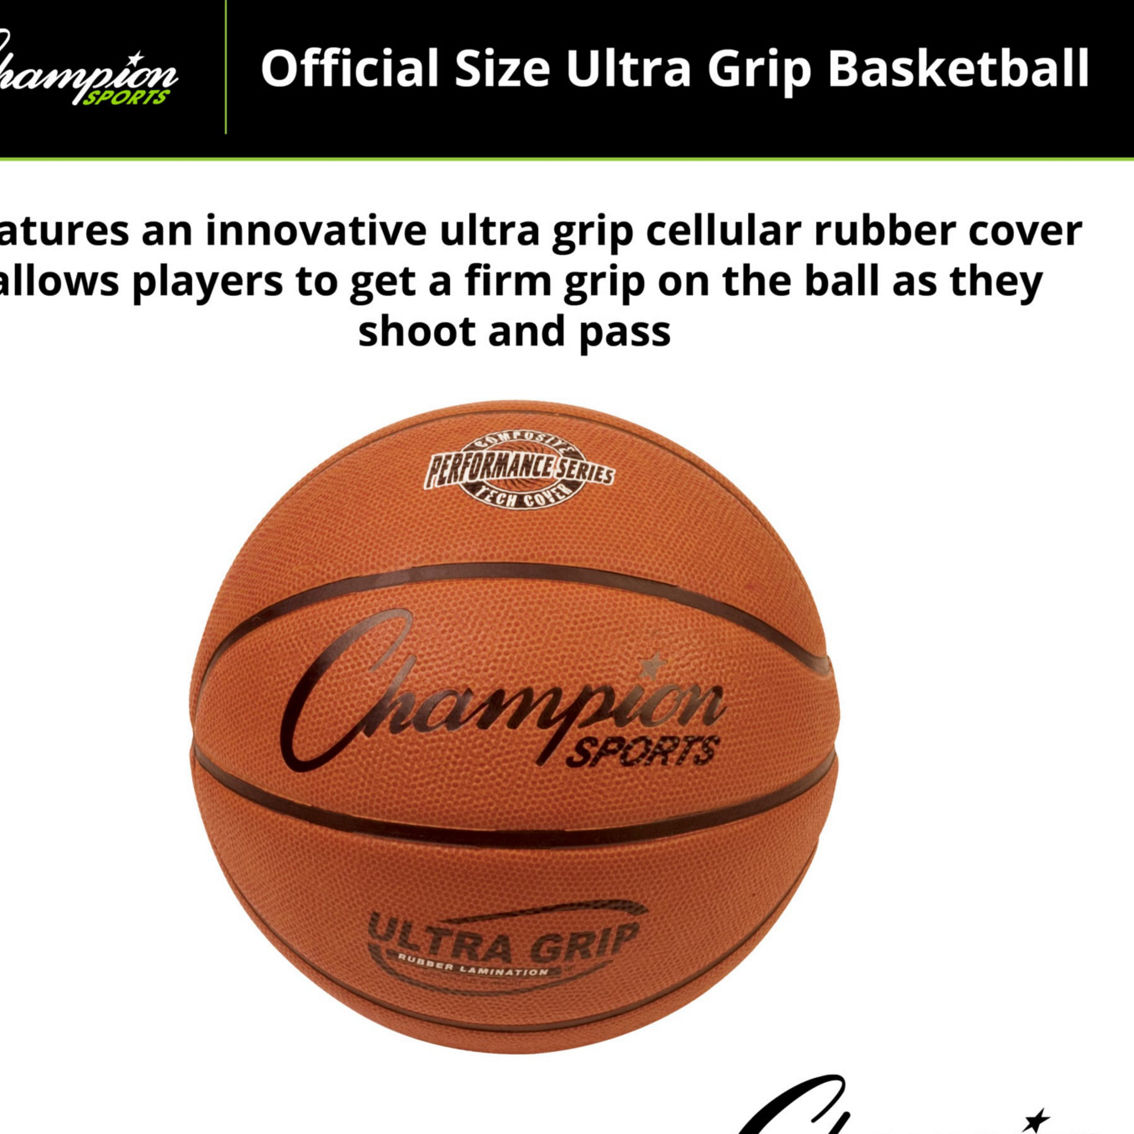 Champion Sports Ultra Grip Rubber Basketball with Bladder, Official Size 7 - Image 3 of 5